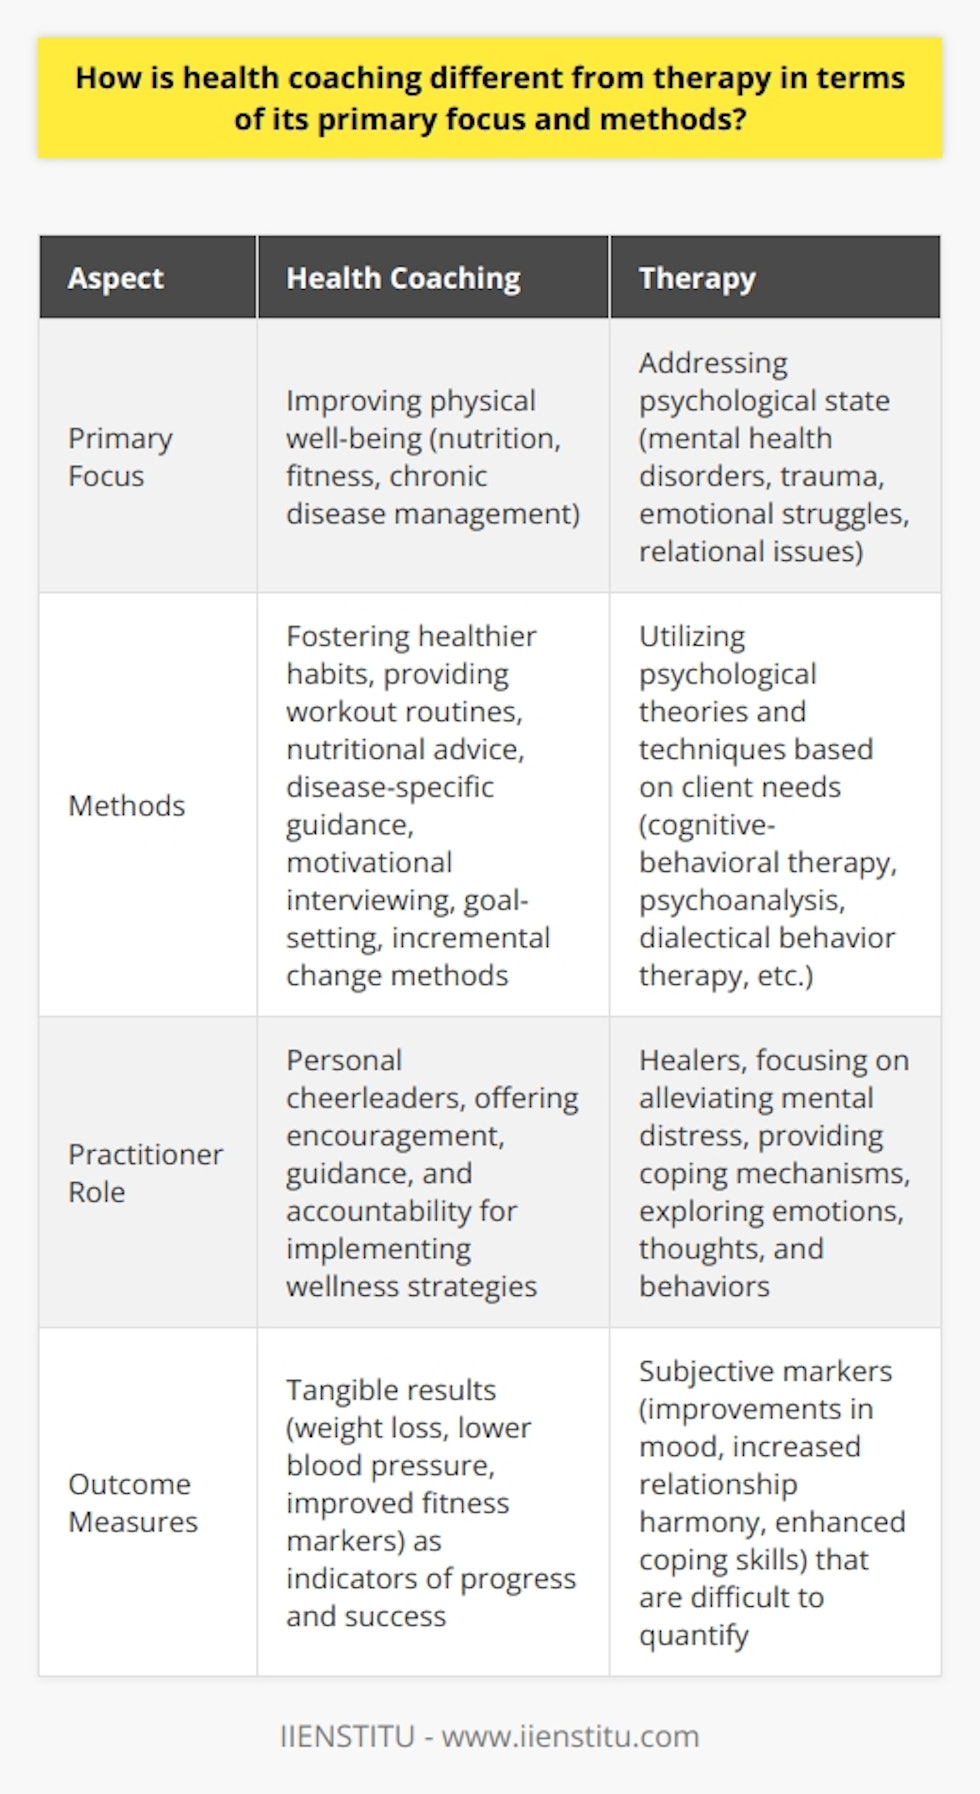 Health coaching and therapy are two distinct practices that target different aspects of individual development. Health coaching primarily focuses on improving an individual's physical well-being, including nutrition, fitness, and chronic disease management. Therapy, on the other hand, aims to address an individual's psychological state, such as mental health disorders, trauma, emotional struggles, and relational issues.In terms of methods, health coaches emphasize fostering healthier habits by providing workout routines, nutritional advice, or disease-specific guidance. They employ motivational interviewing techniques, goal-setting, and incremental change methods to help clients achieve their wellness goals. Therapists, on the other hand, utilize various psychological theories and techniques based on the needs of the client. This can include cognitive-behavioral therapy, psychoanalysis, or dialectical behavior therapy, among others.The role of the practitioner also differs in health coaching and therapy. Health coaches often act as personal cheerleaders, offering encouragement and guidance to implement wellness strategies. They support clients in making healthier choices and provide accountability throughout the process. Therapists, on the other hand, serve as healers, focusing on alleviating mental distress and providing coping mechanisms. They work closely with clients to explore their emotions, thoughts, and behaviors in order to facilitate healing and personal growth.When it comes to outcome measures, health coaching primarily focuses on tangible results such as weight loss, lower blood pressure, or improved fitness markers. These measurable outcomes serve as indicators of progress and success in health coaching. Therapy, on the other hand, deals with the more elusive sphere of emotions and cognition. Outcome measures in therapy often revolve around improvements in mood, increased relationship harmony, or enhanced coping skills, which are subjective and more difficult to quantify.In summary, health coaching and therapy have different primary focuses, methods, practitioner roles, and outcome measures. Health coaching aims to enhance physical health and well-being, while therapy focuses on addressing mental health and facilitating emotional healing. The methods used in each practice vary, with health coaching emphasizing healthier habits and motivation, and therapy utilizing various psychological theories and techniques. The role of the practitioner also differs, with health coaches acting as personal cheerleaders and therapists working to alleviate mental distress. The outcome measures in health coaching are often tangible and measurable, while therapy focuses on subjective markers of improvement.